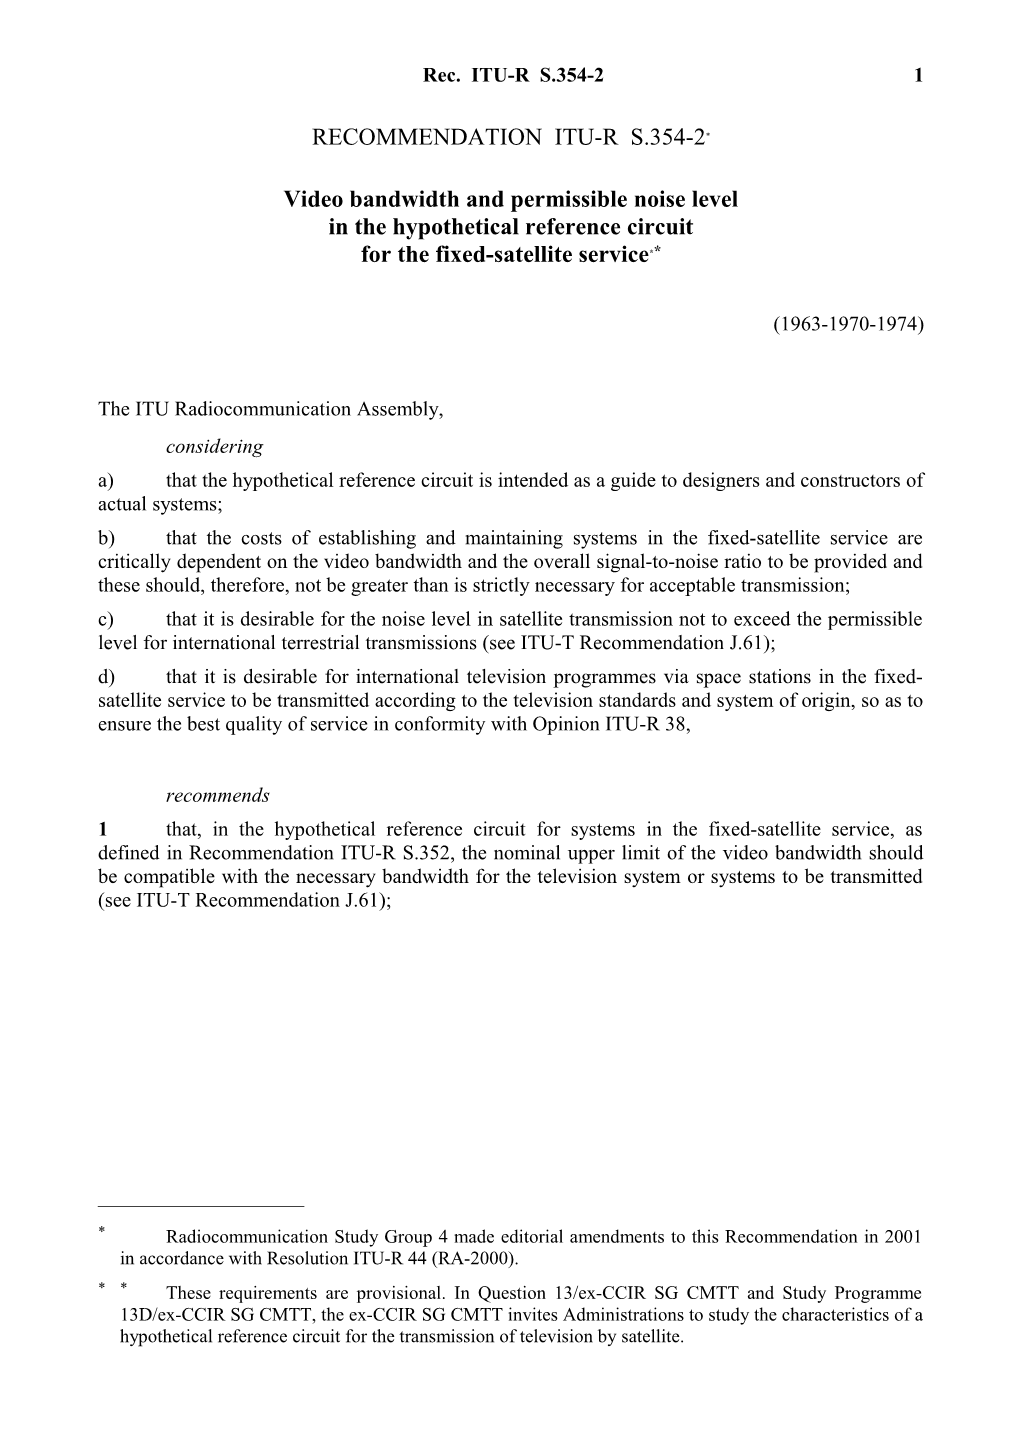 RECOMMENDATION ITU-R S.354-2* - Video Bandwidth and Permissible Noise Level in the Hypothetical